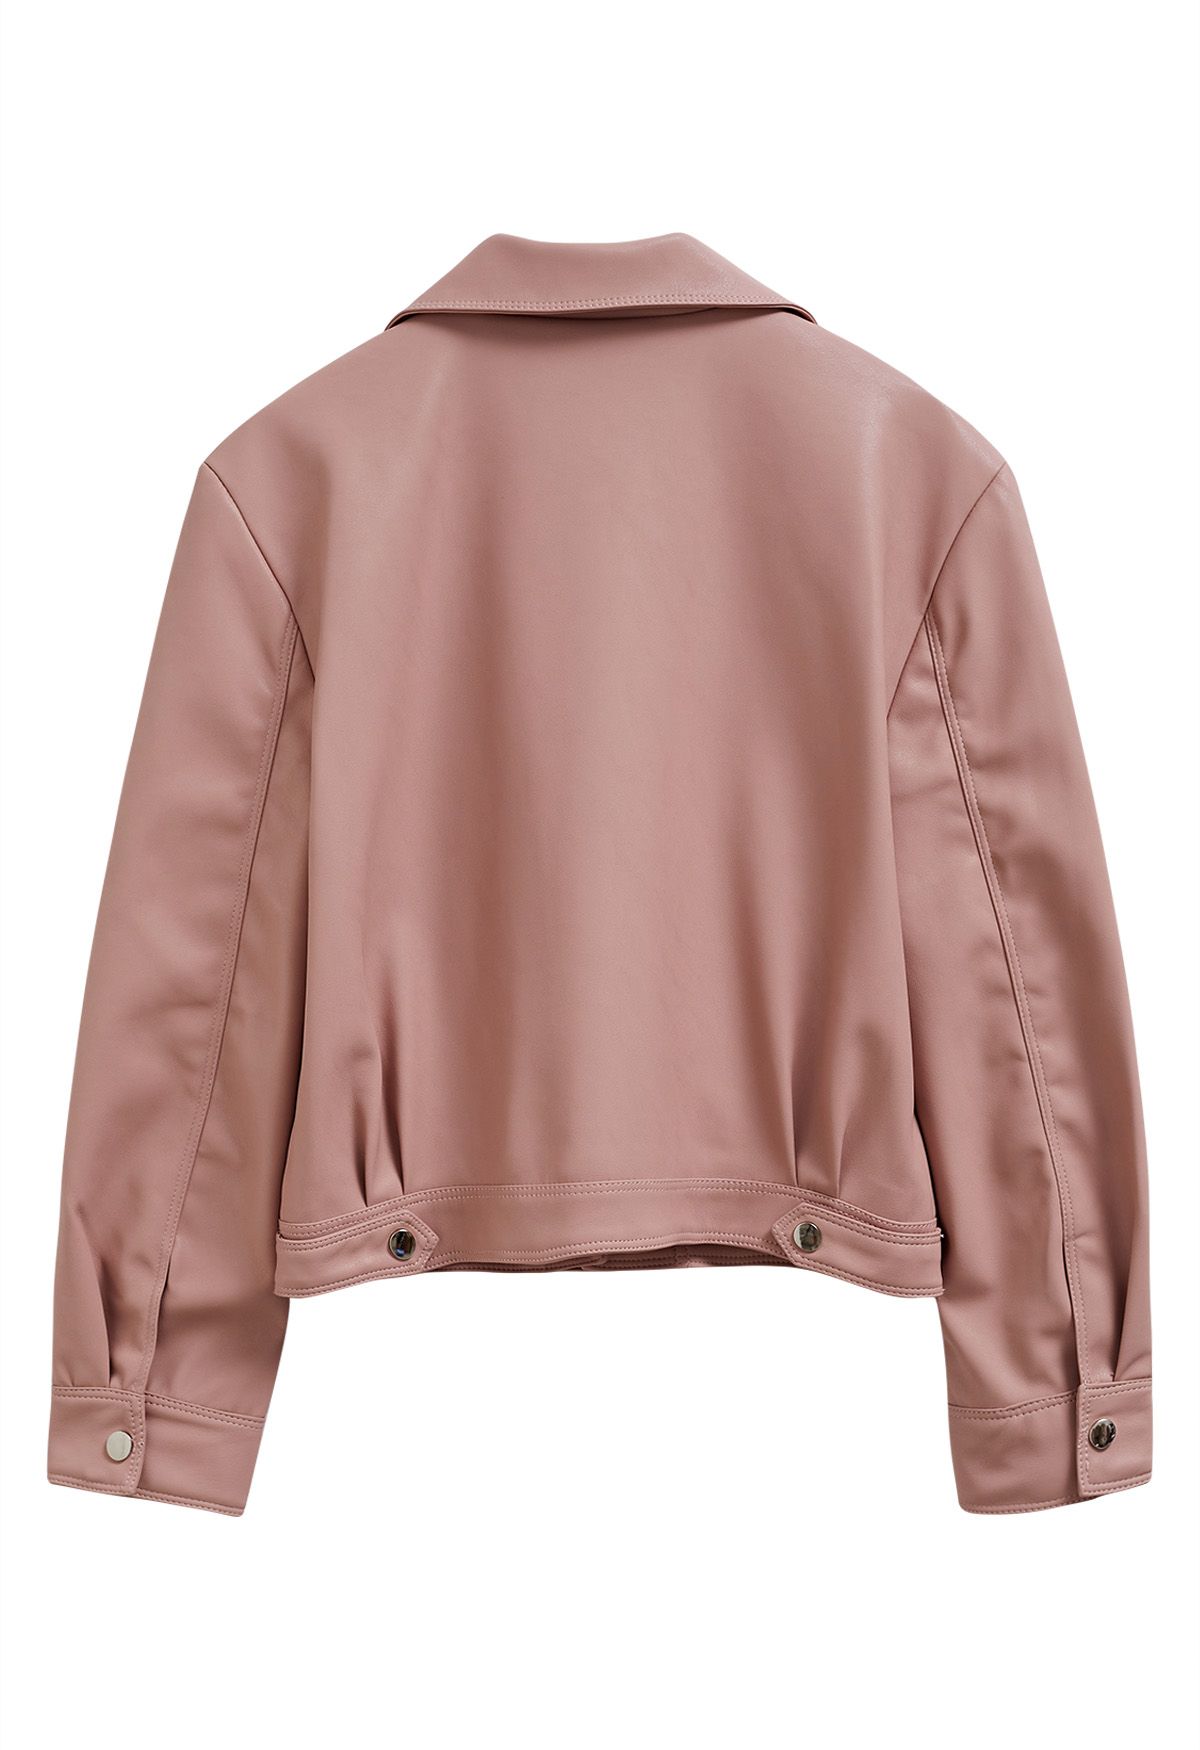 Diagonal Zip Up Faux Leather Jacket in Pink